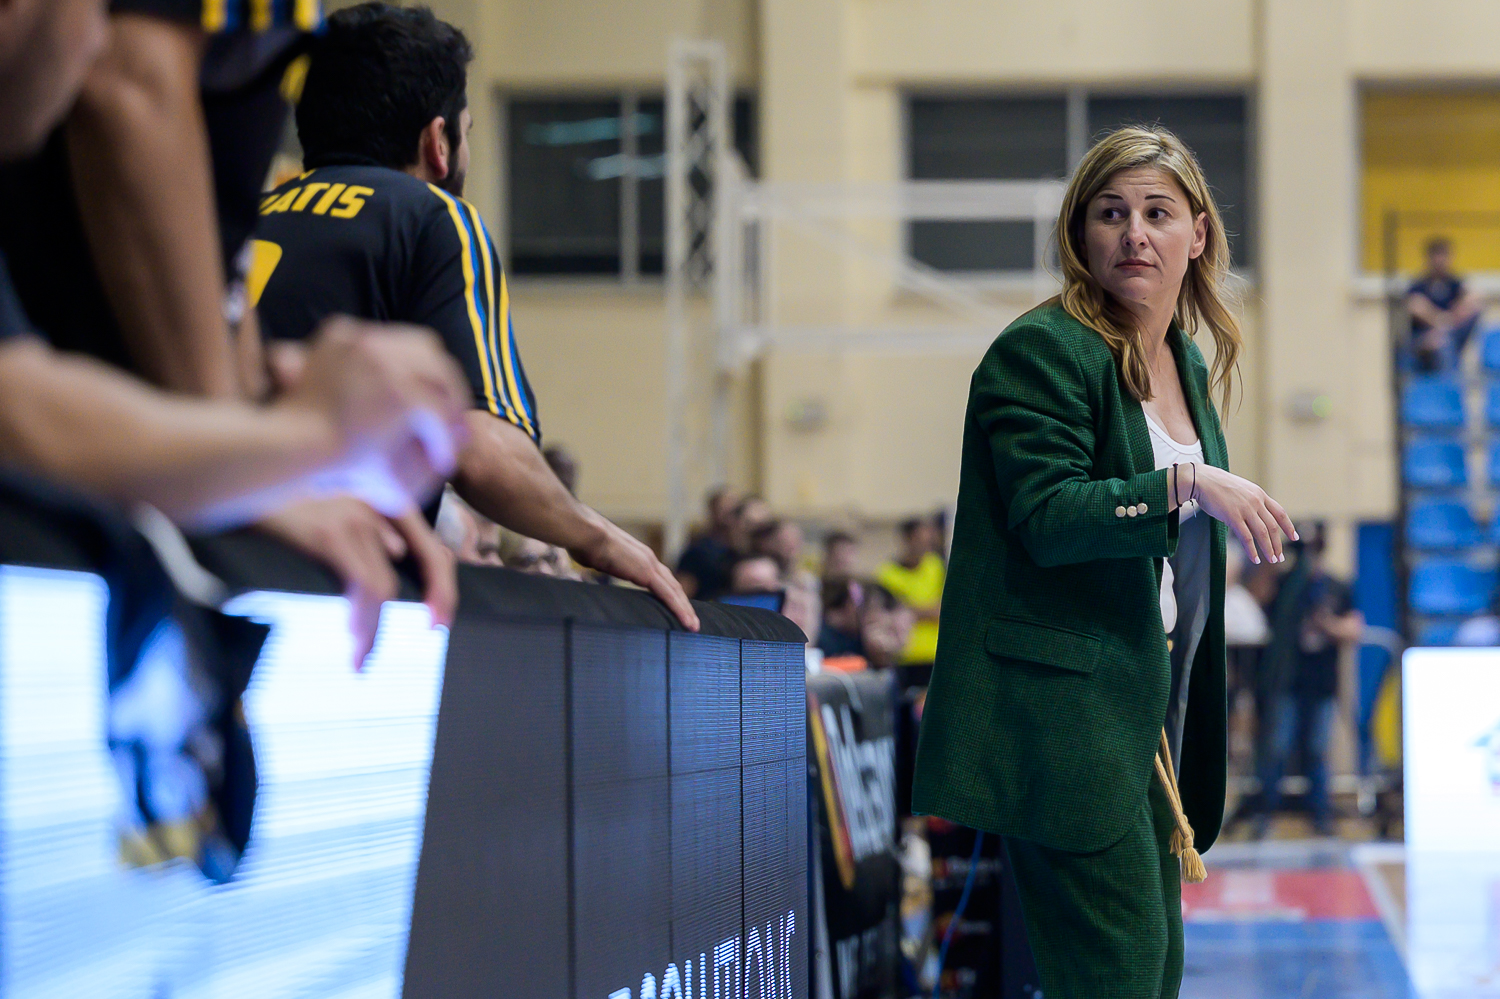 Kalia Papadopoulou: We had a lot of pressure before the game